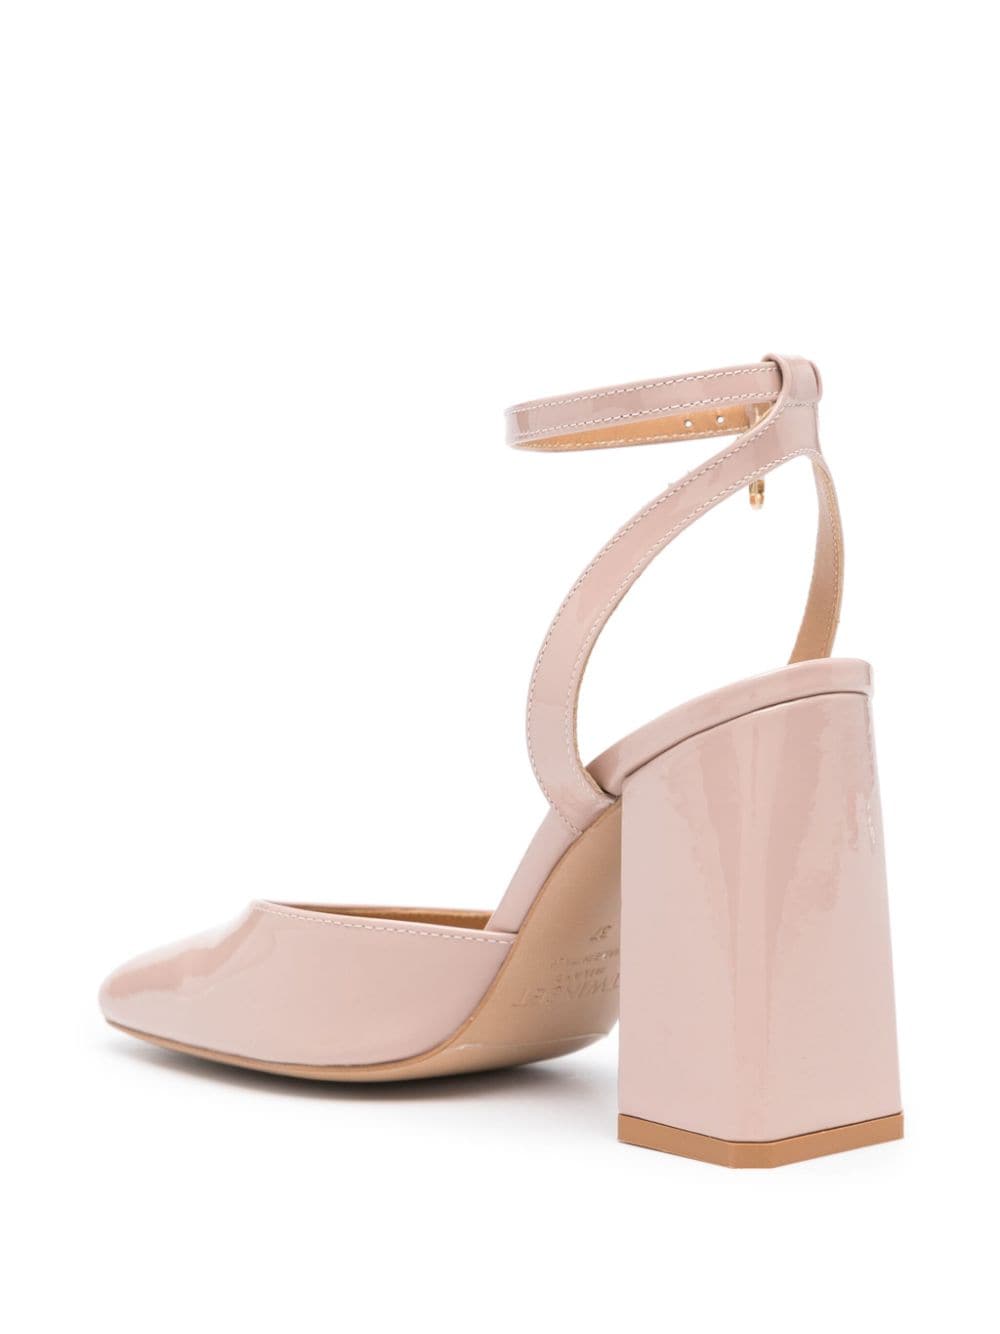 Blush pink calf leather sandals